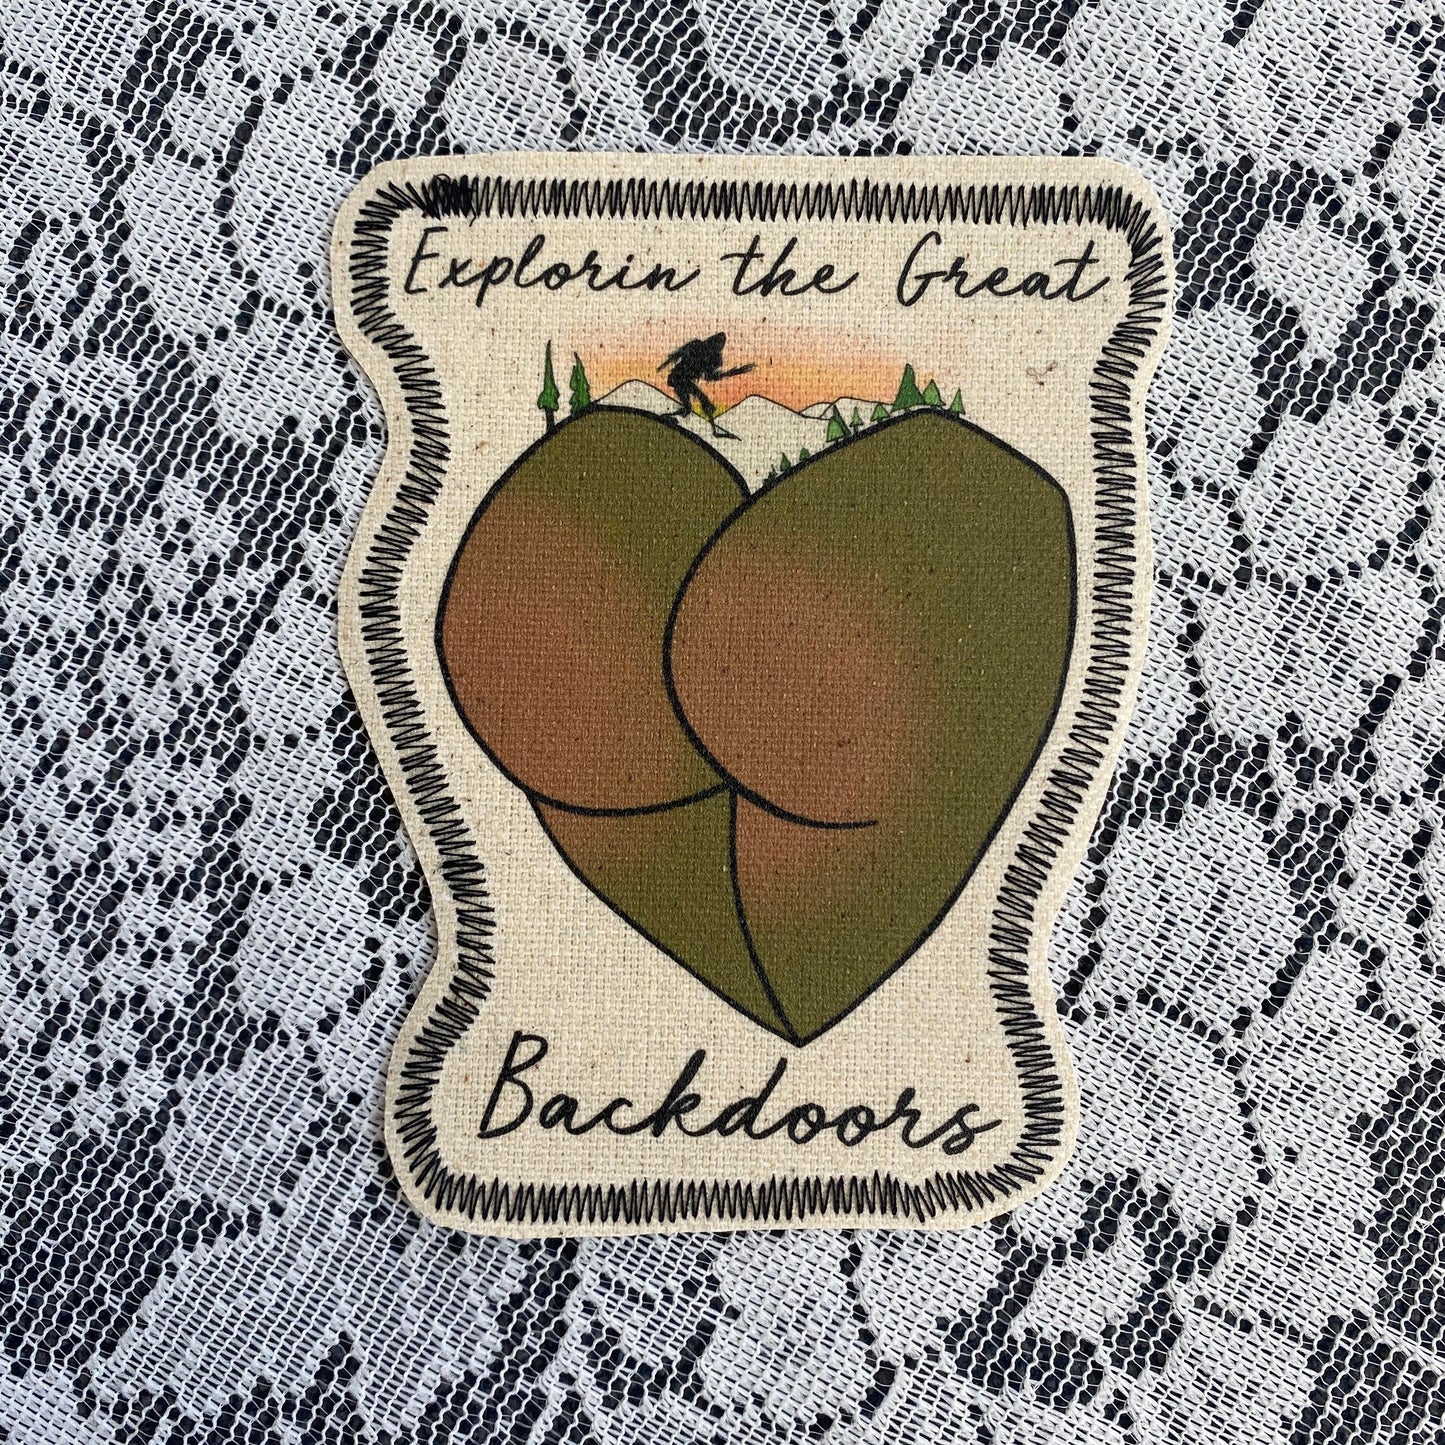 Explorin' the Great Backdoors Patch